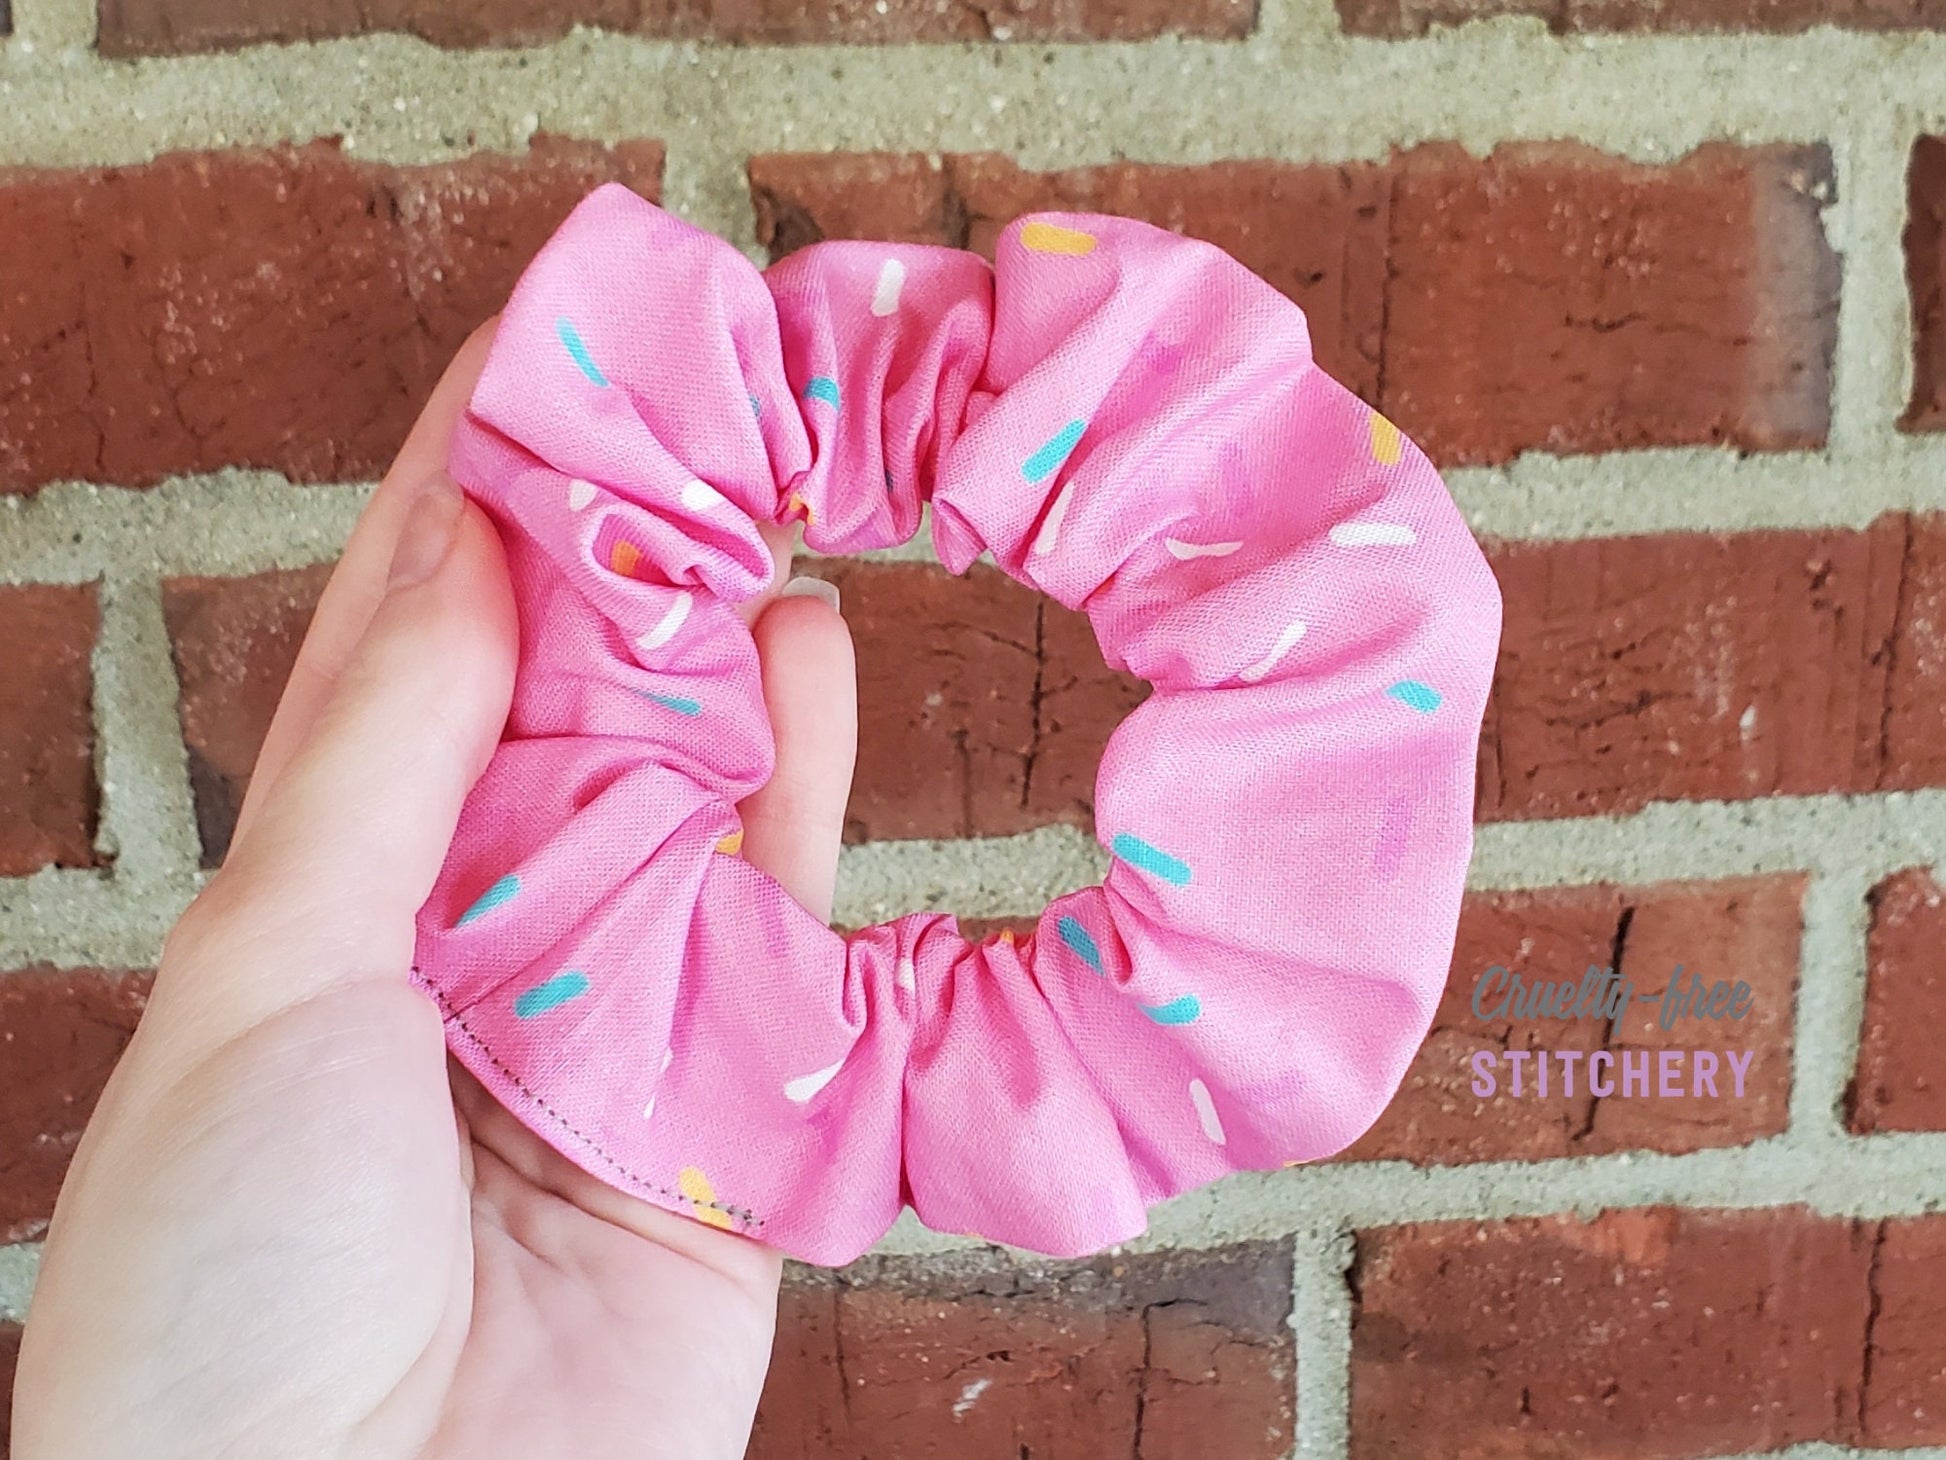 A bright pink scrunchie with scattered sprinkles in blue, white, yellow, and light pink. Pictured in my hand on a red brick background.